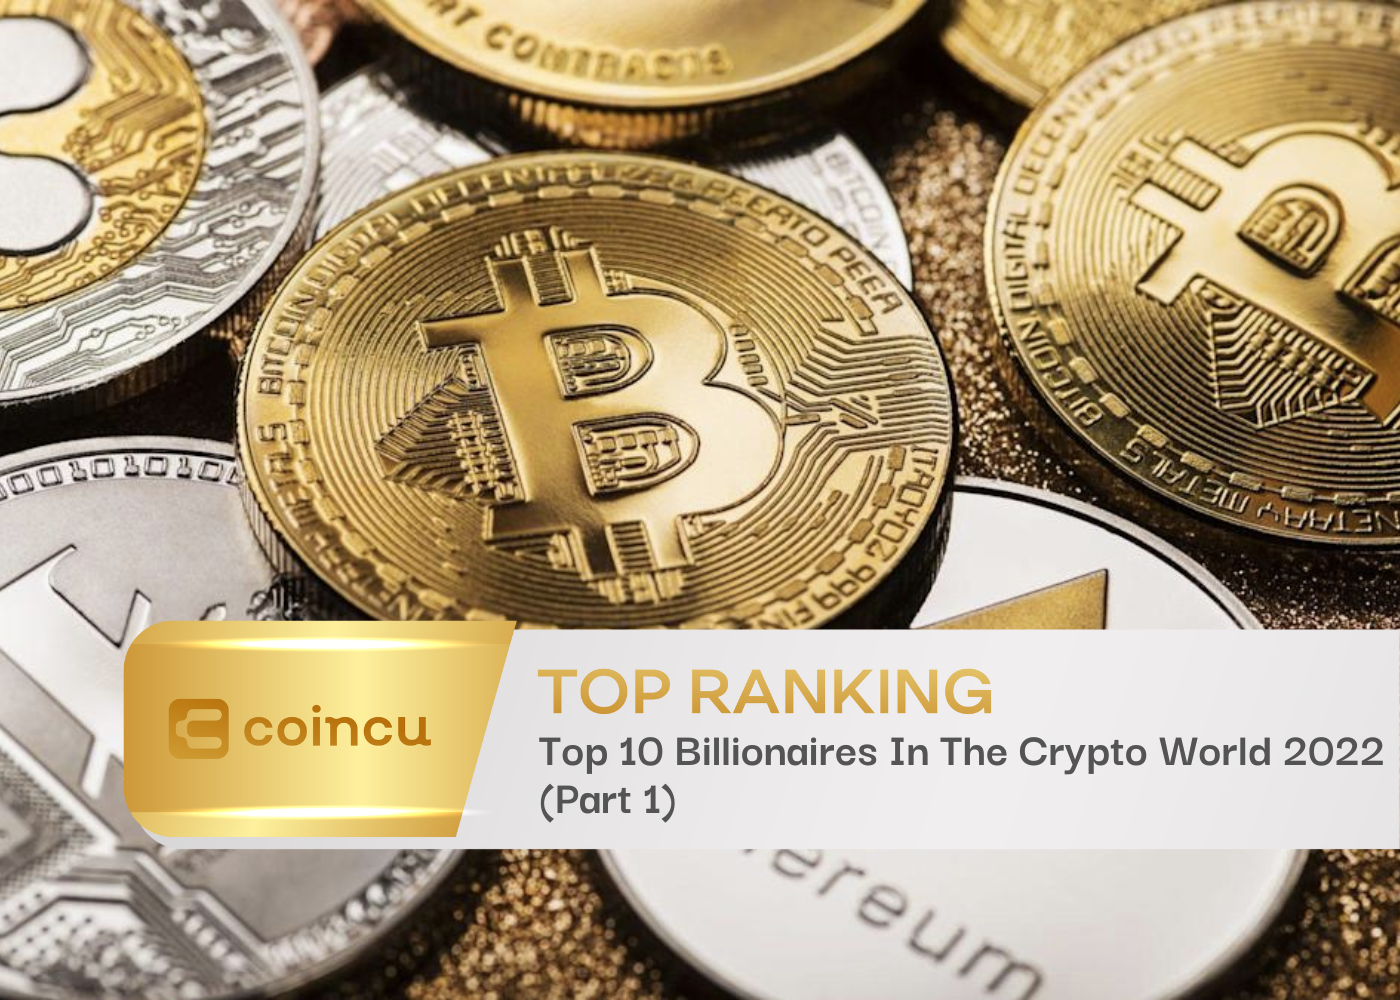 Top 10 Billionaires In The Crypto World 2022 (Part 1)